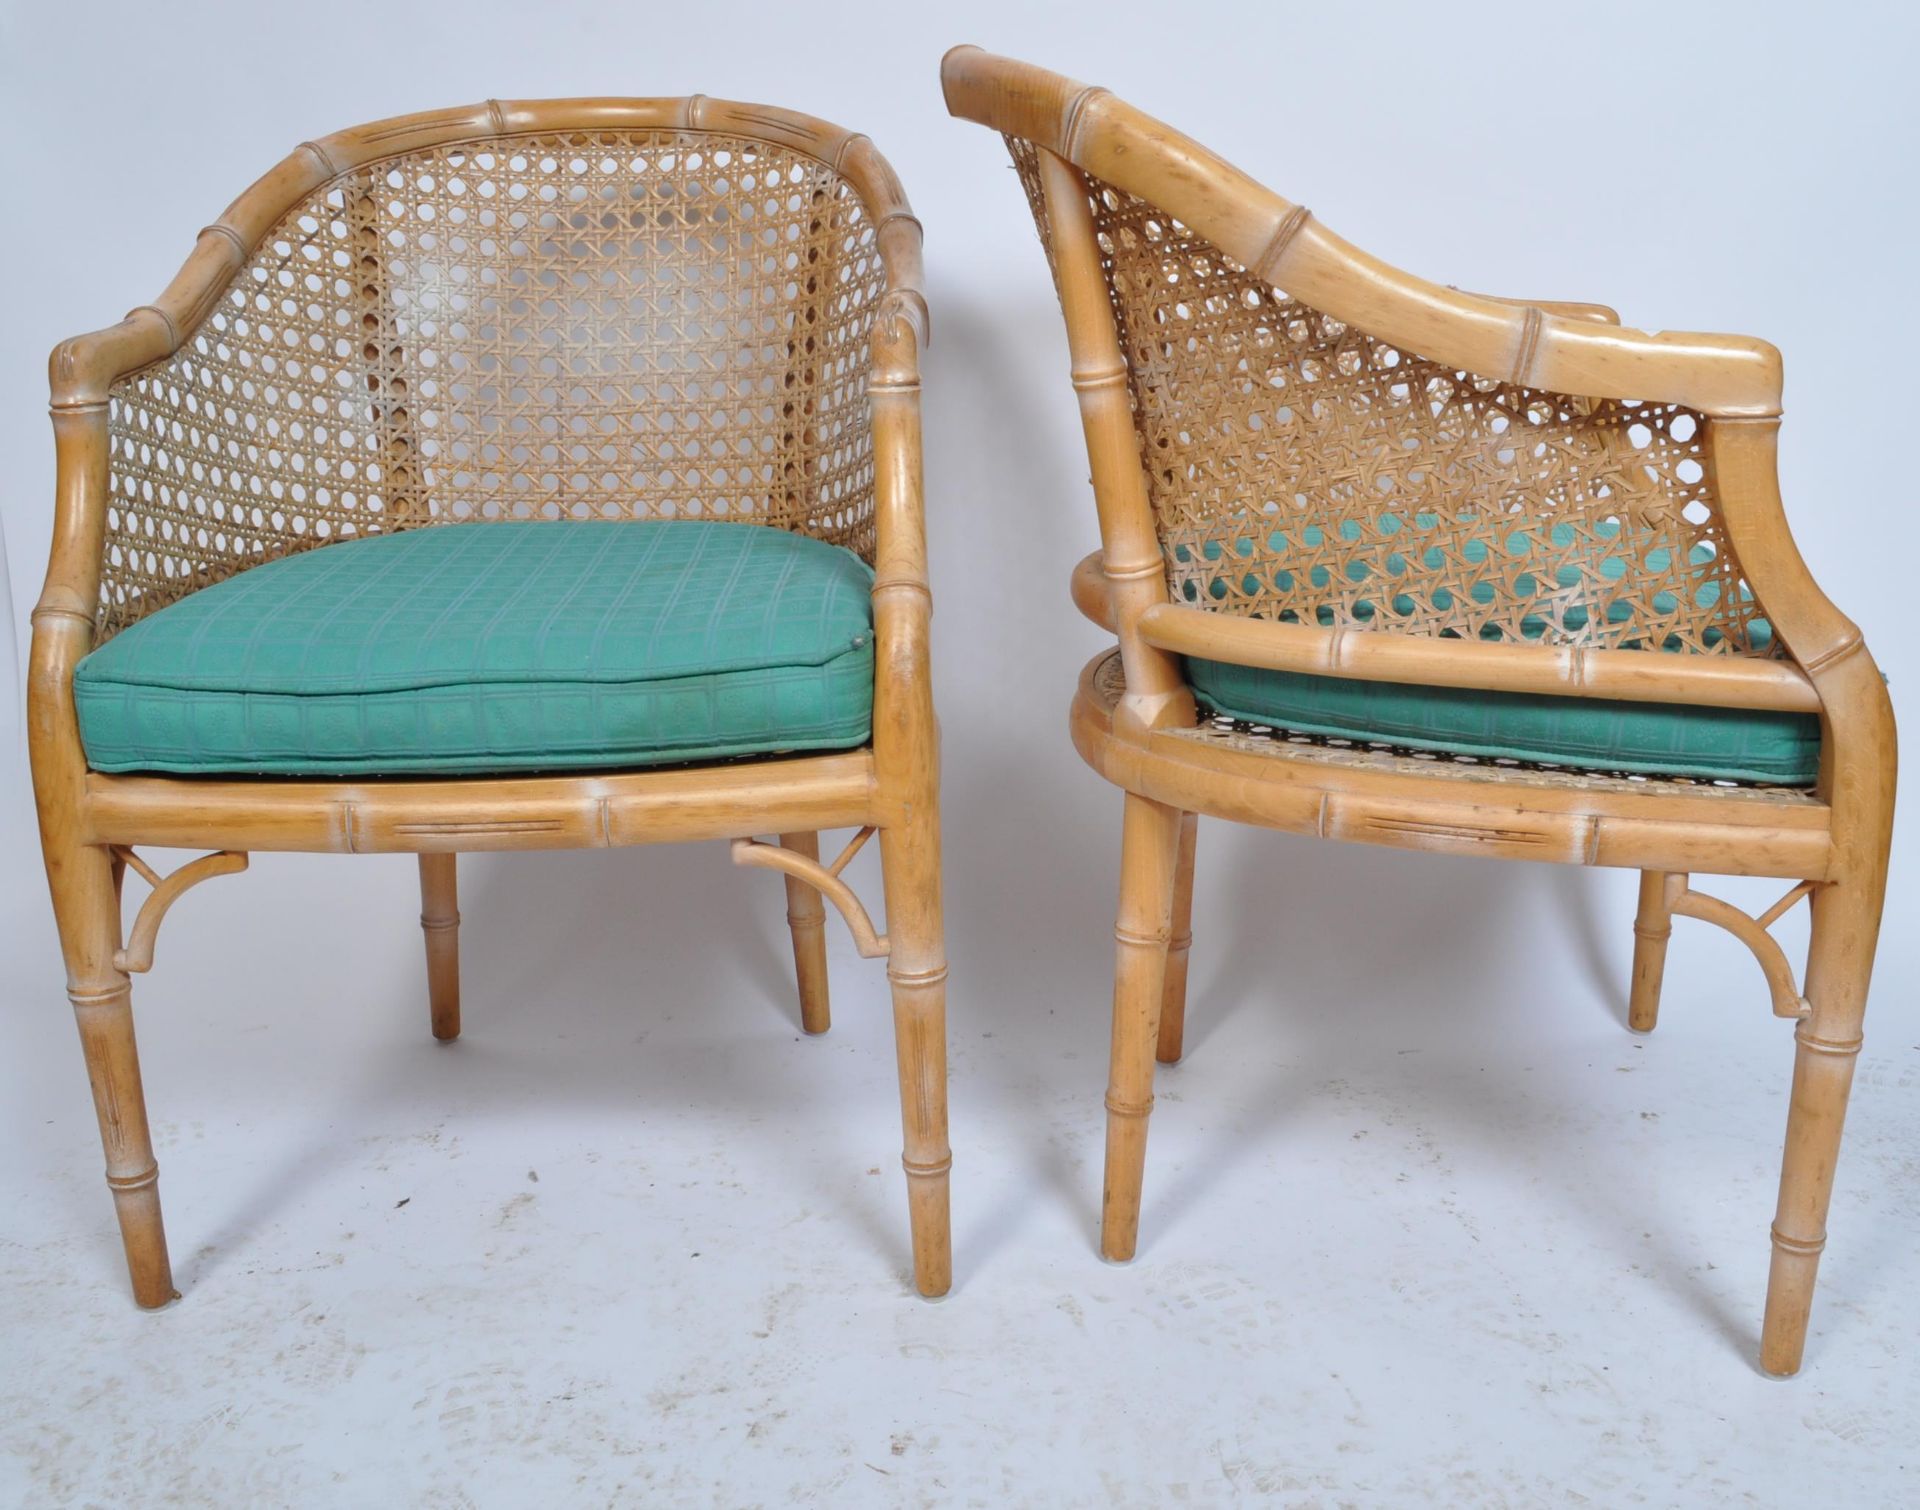 GIORGETTI MANNER RETRO VINTAGE CIRCA 1970S BAMBOO DINING CHAIRS - Image 4 of 5